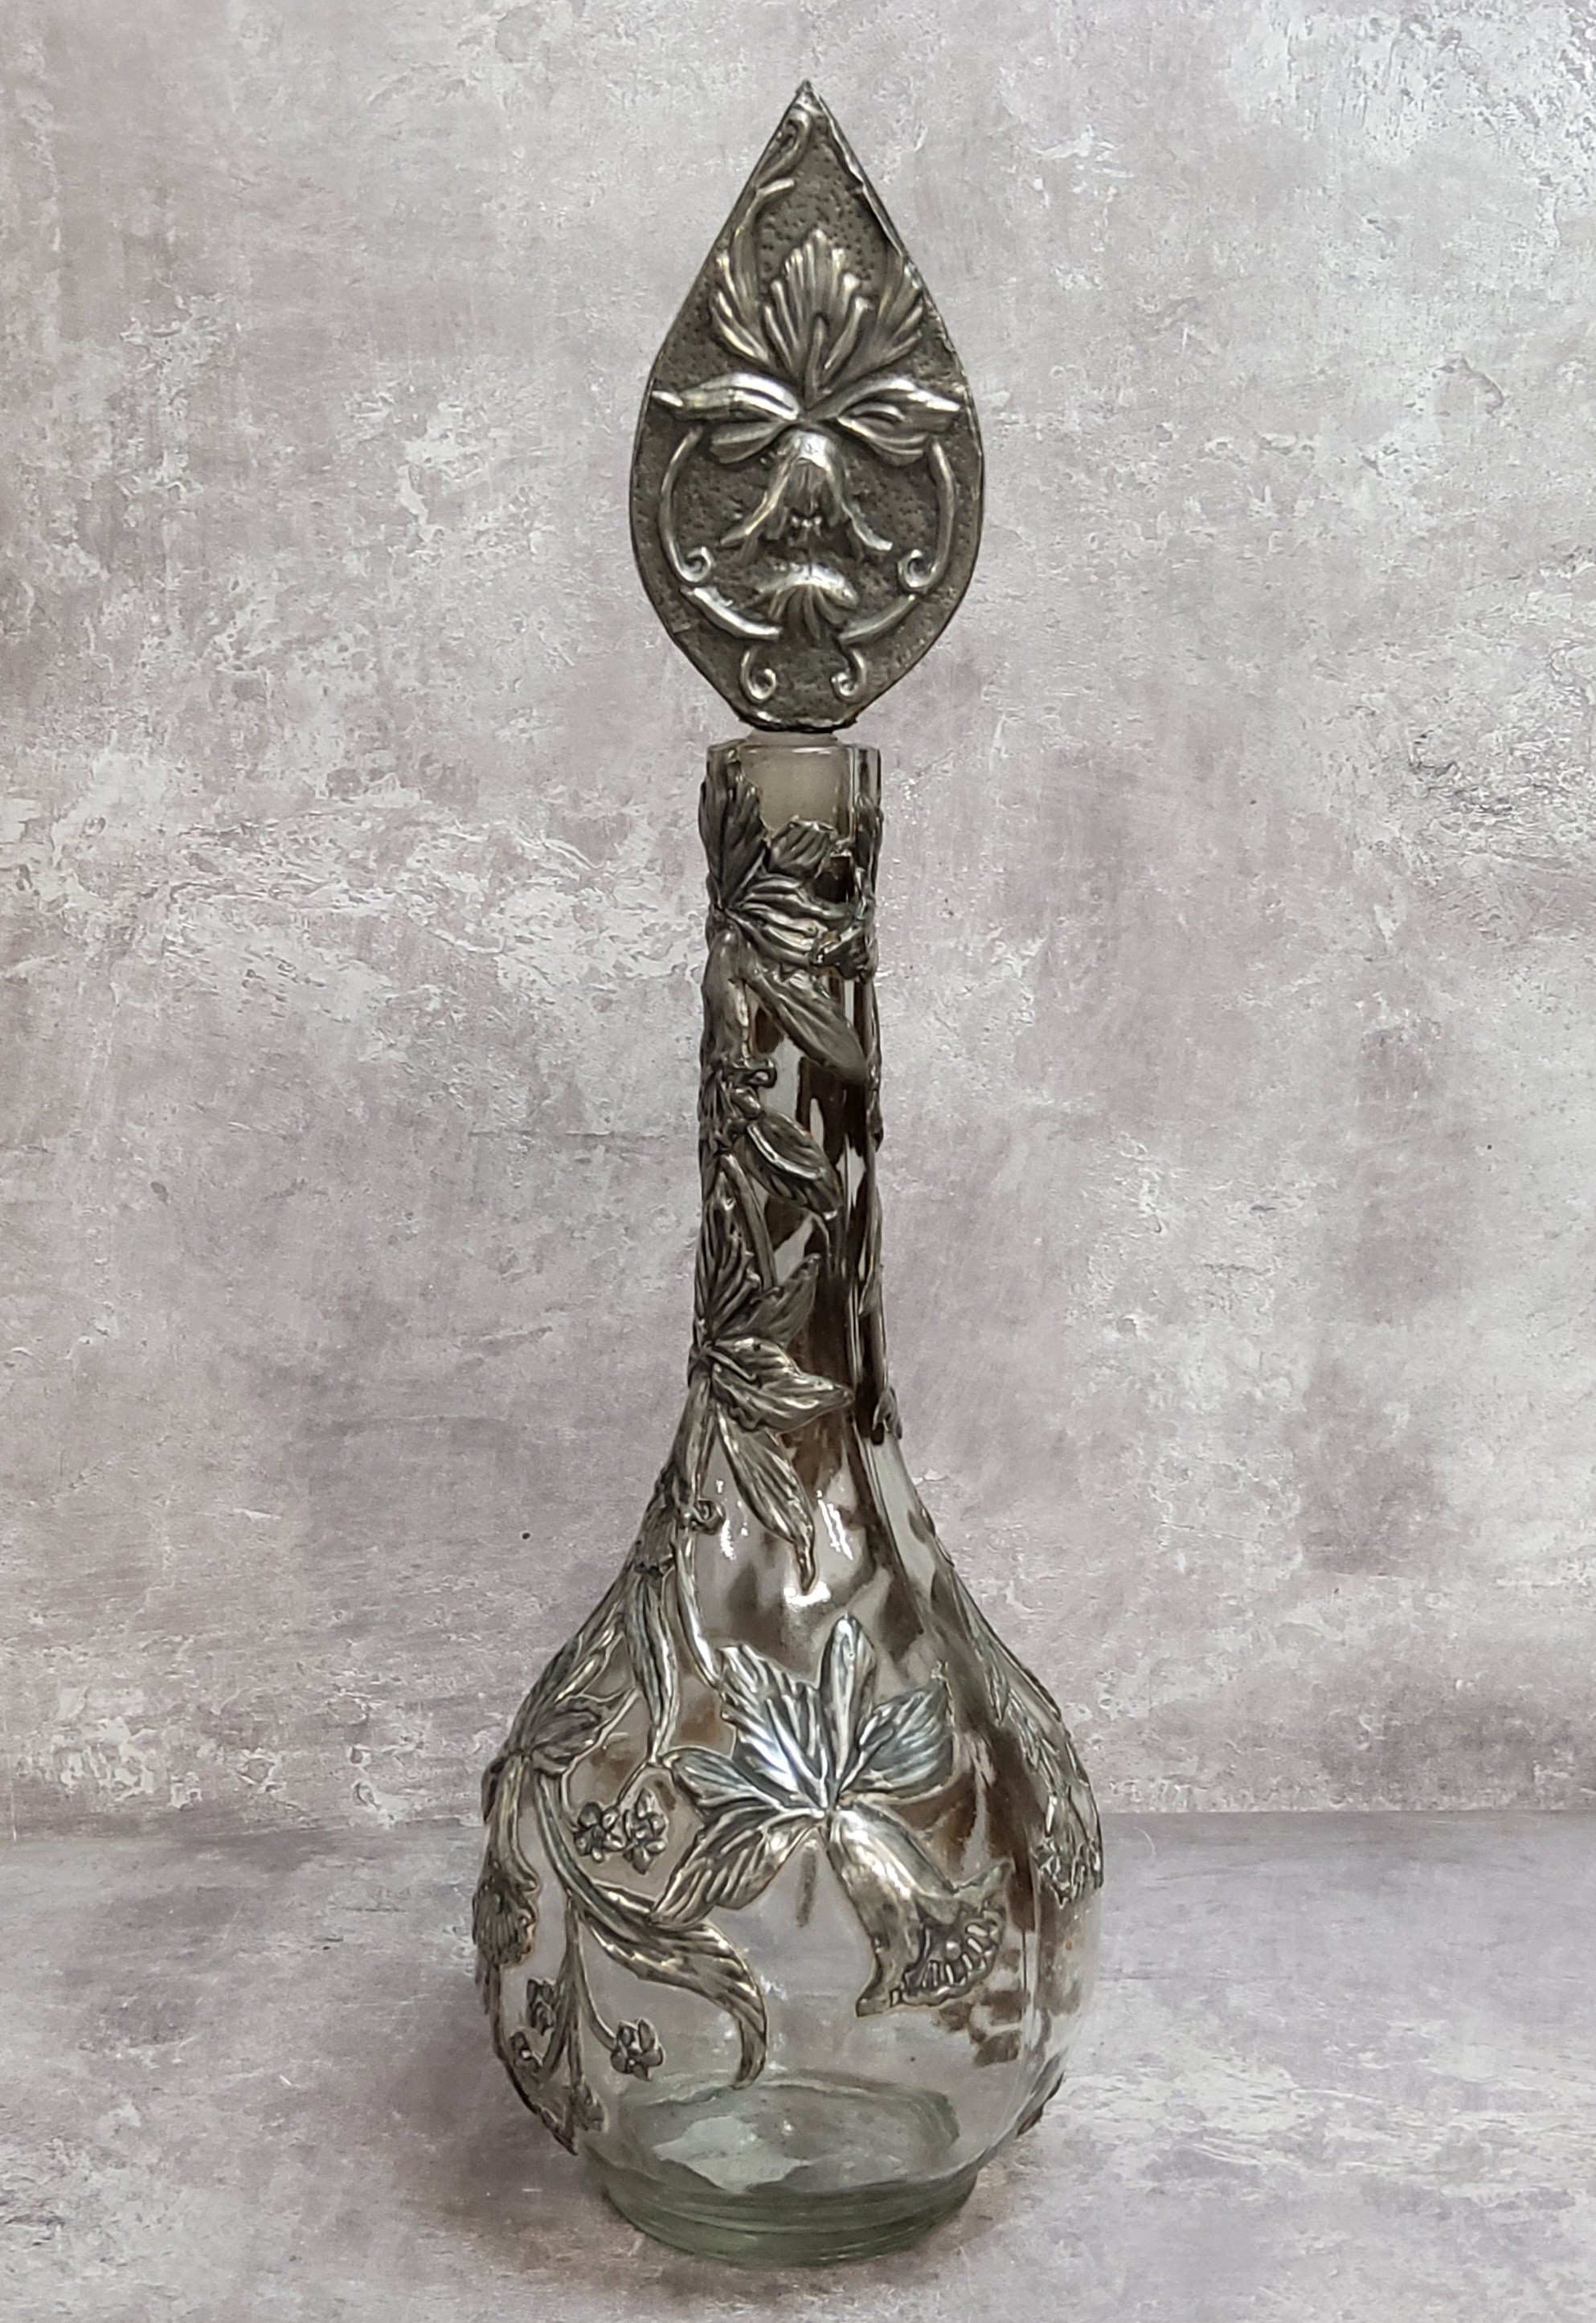 A period Art Nouveau globe and stem shaft vase decorated with sinuous pewter applied reliefwork